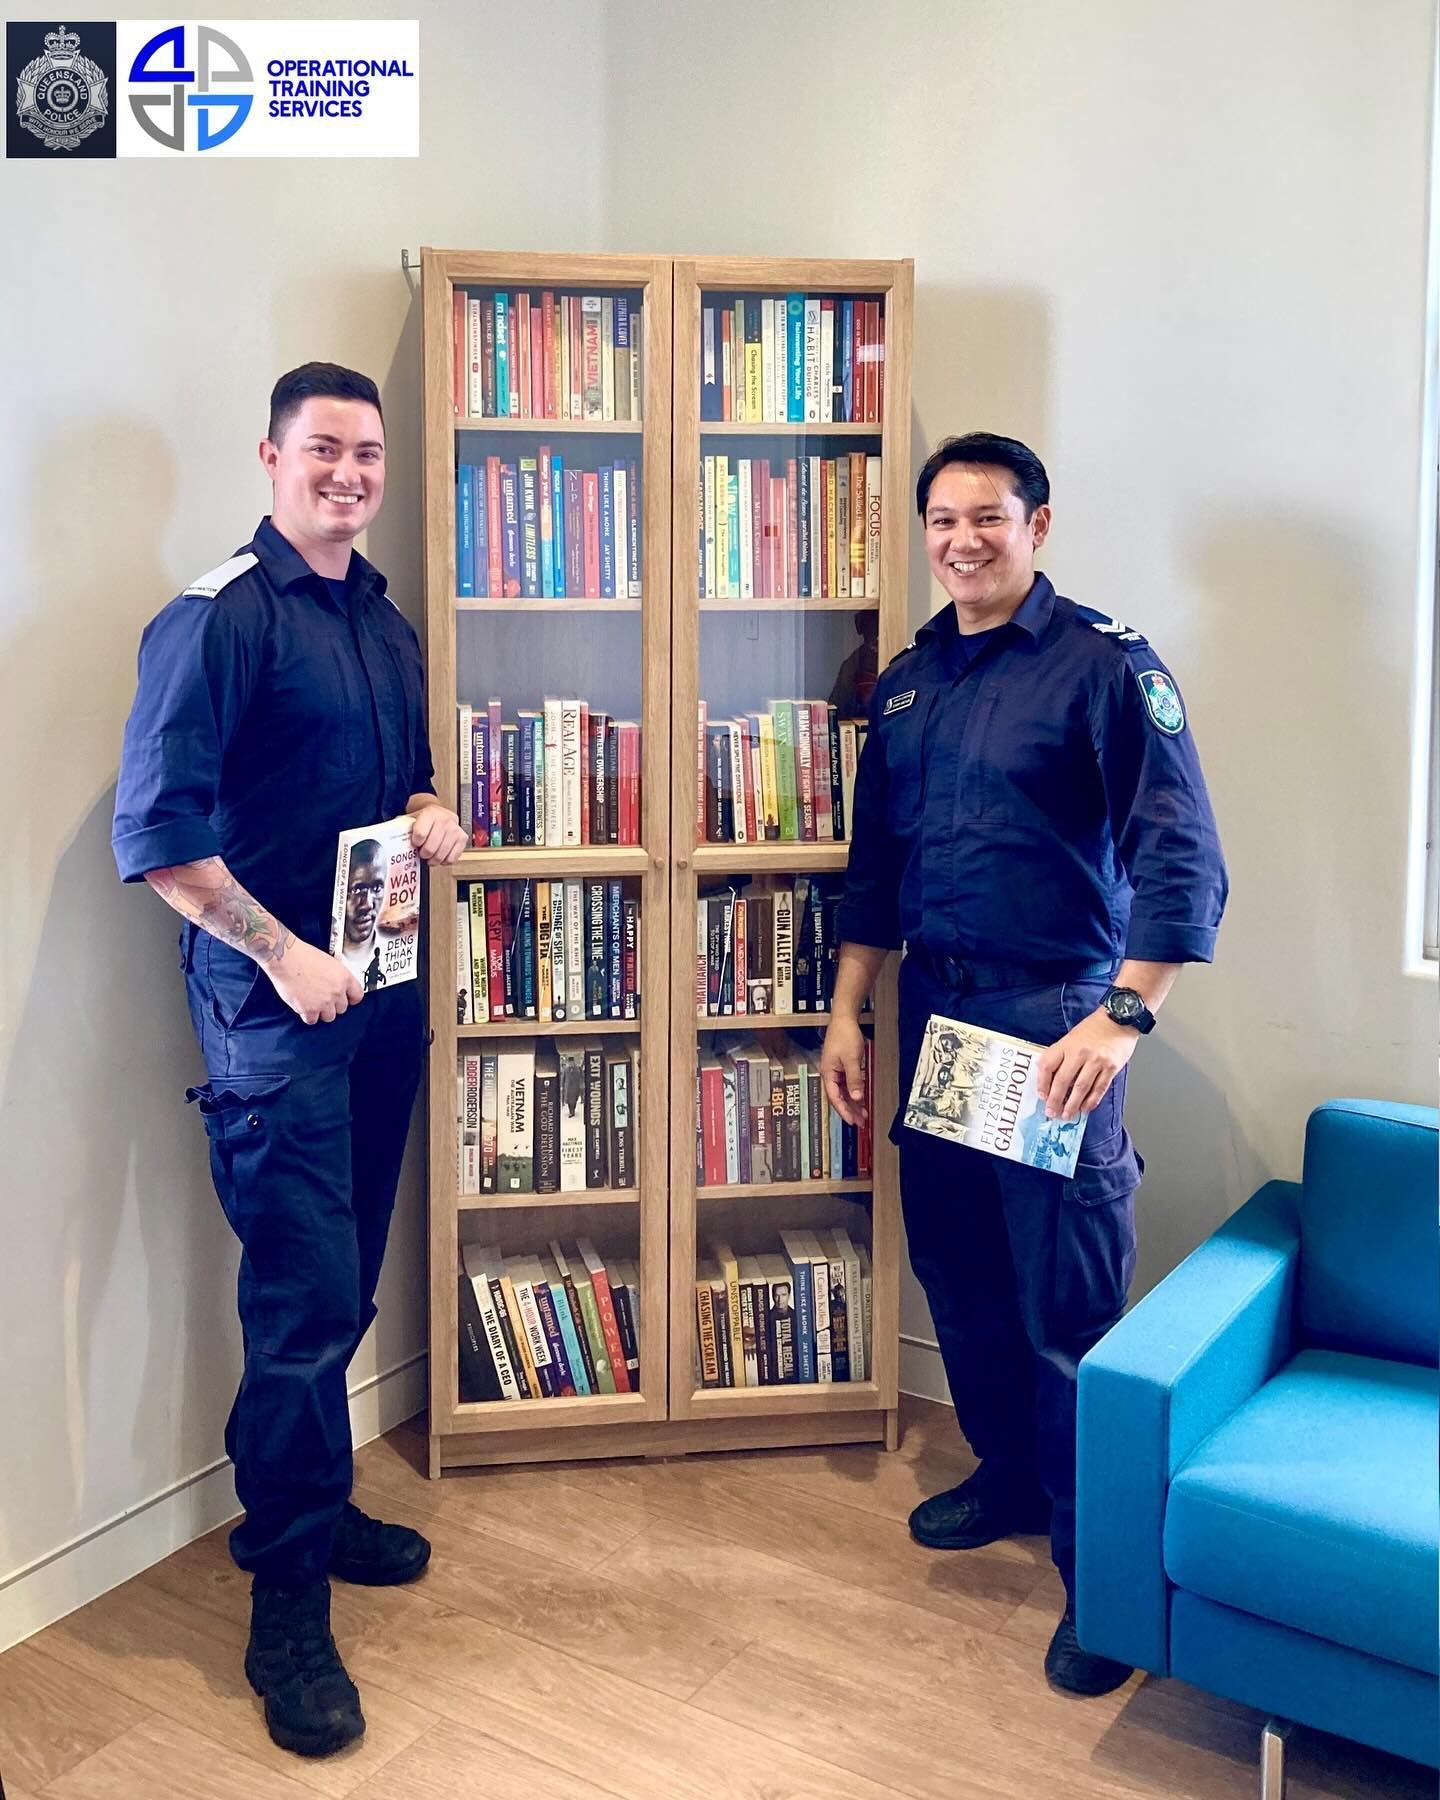 📚 NEW POLICE COMMUNITY LIBRARY 👮&zwj;♂️ 

This Brothers and Books community library is proudly located at the SEQLD Police Academy at WACOL where the training officers can grab a book in between their classes and physical activity. 

If all organis